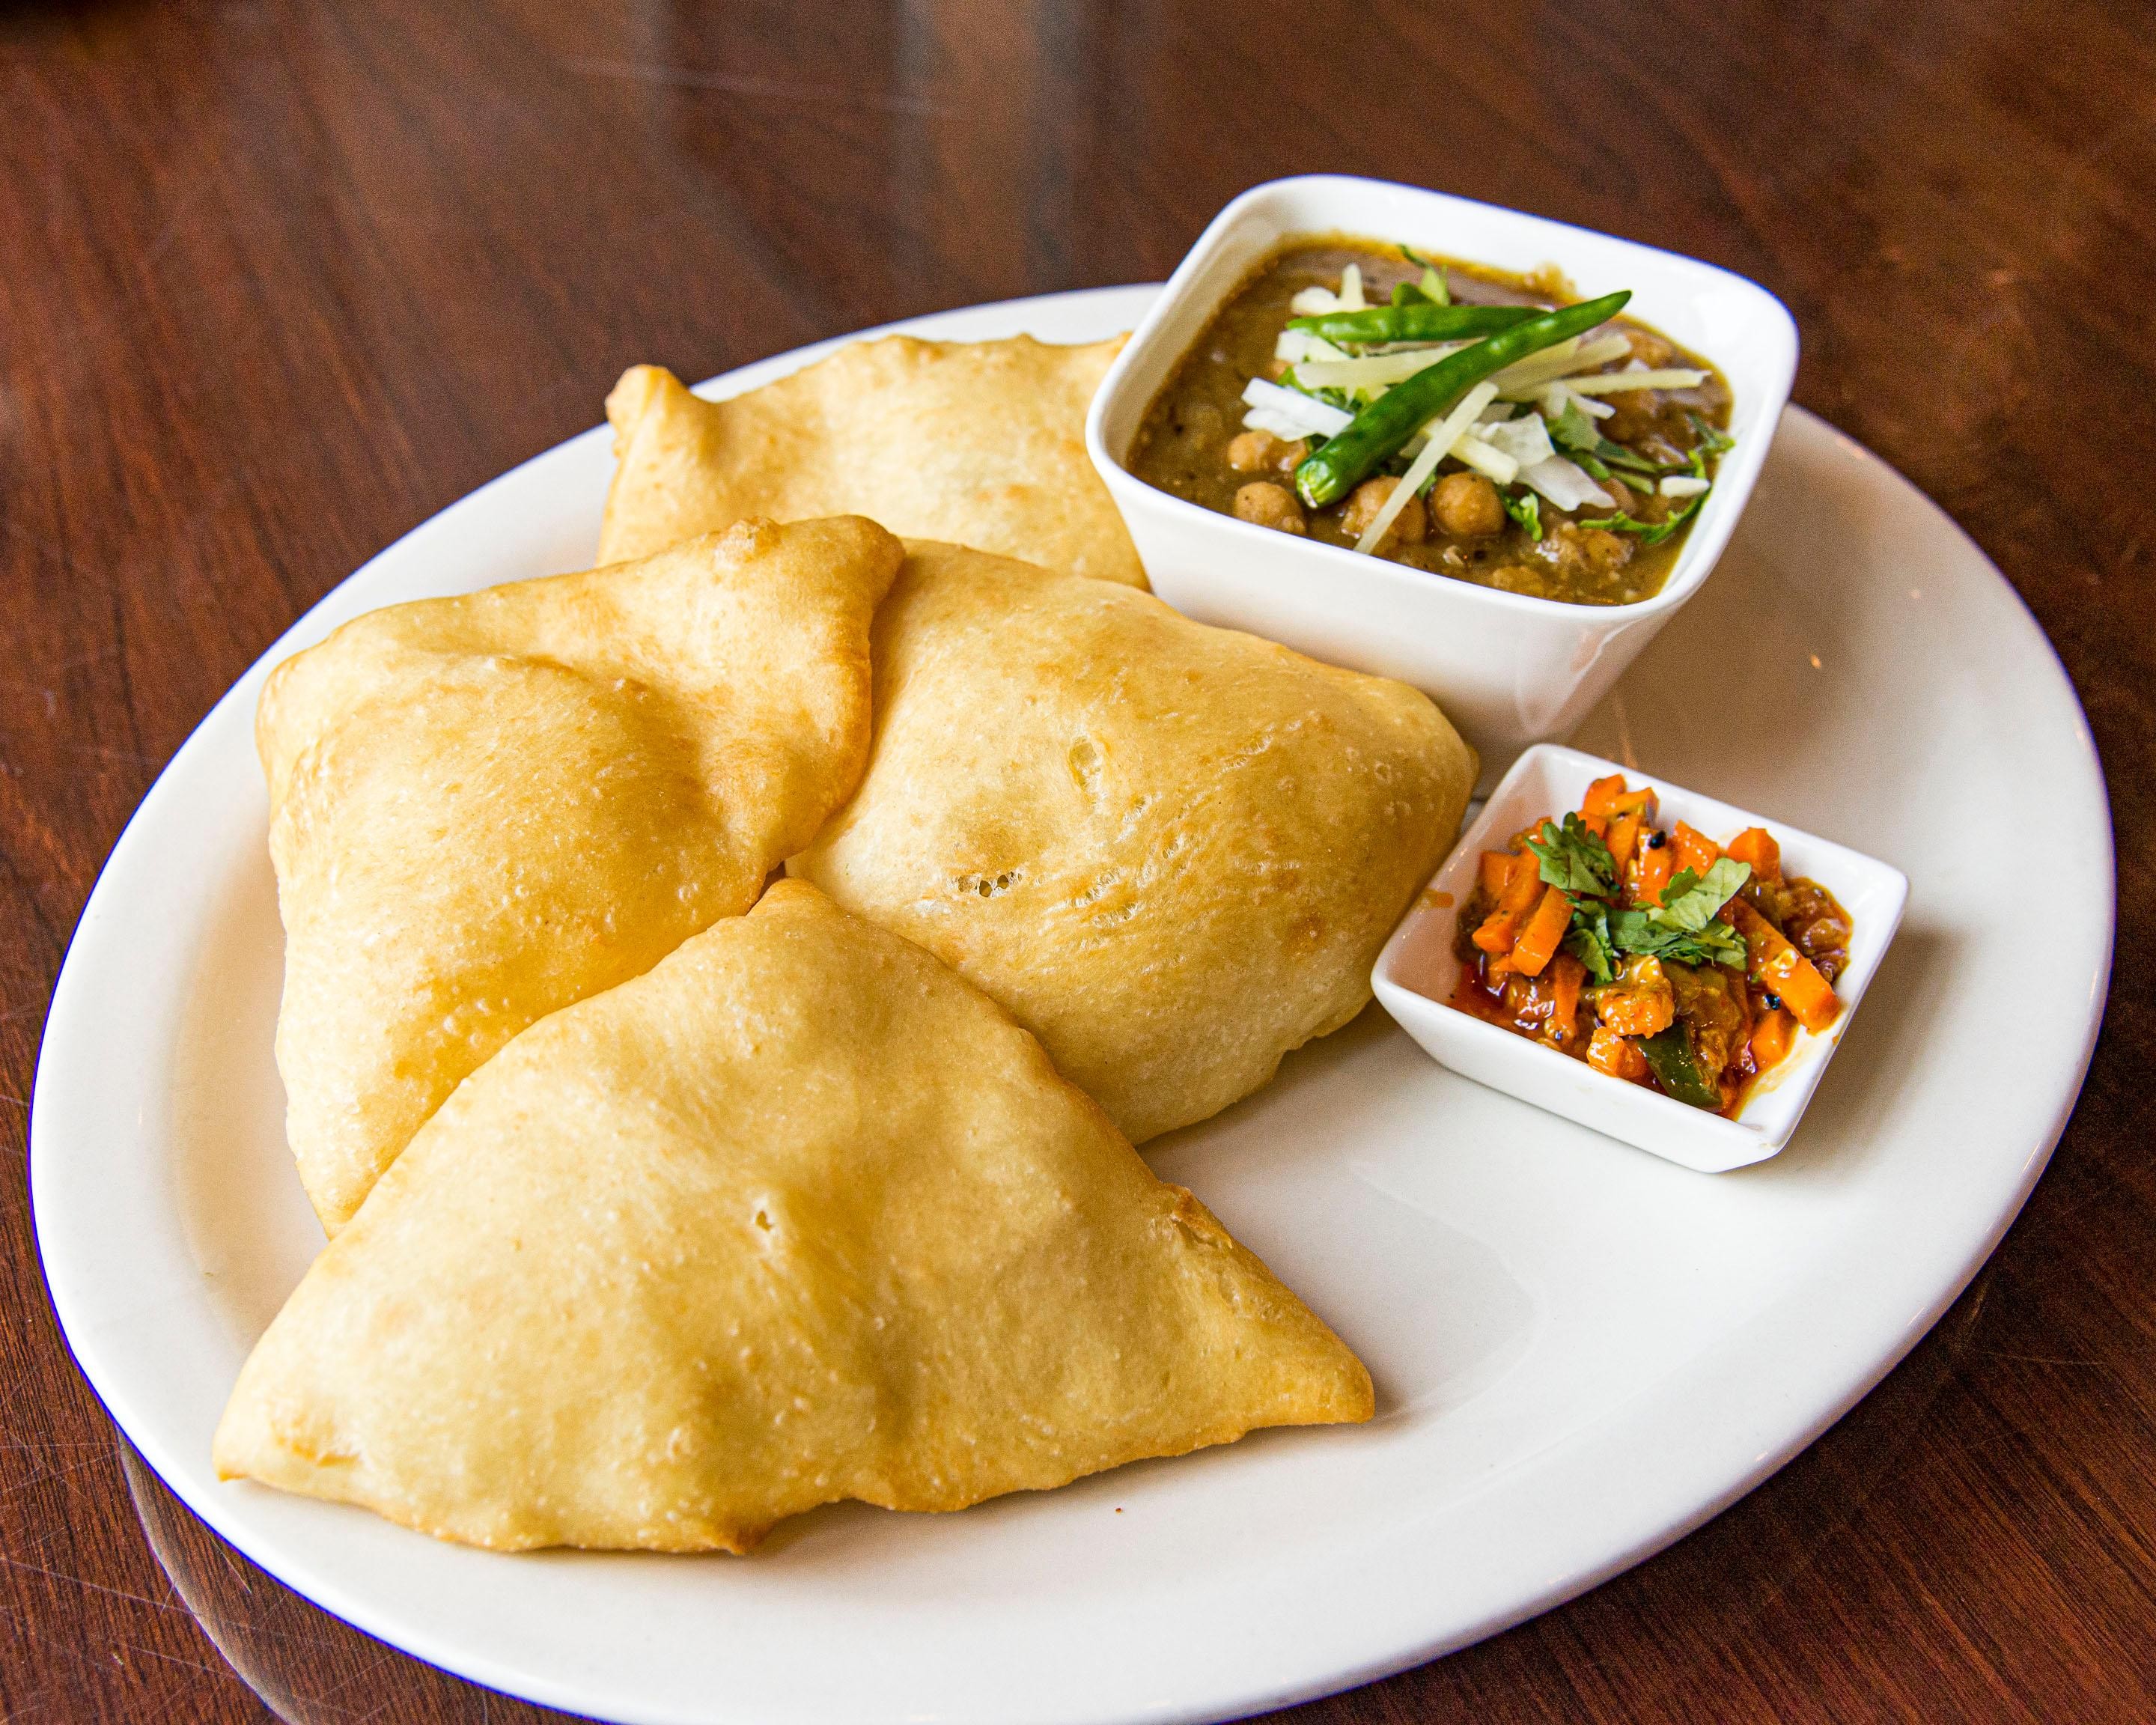 CHOLLE BHATURE